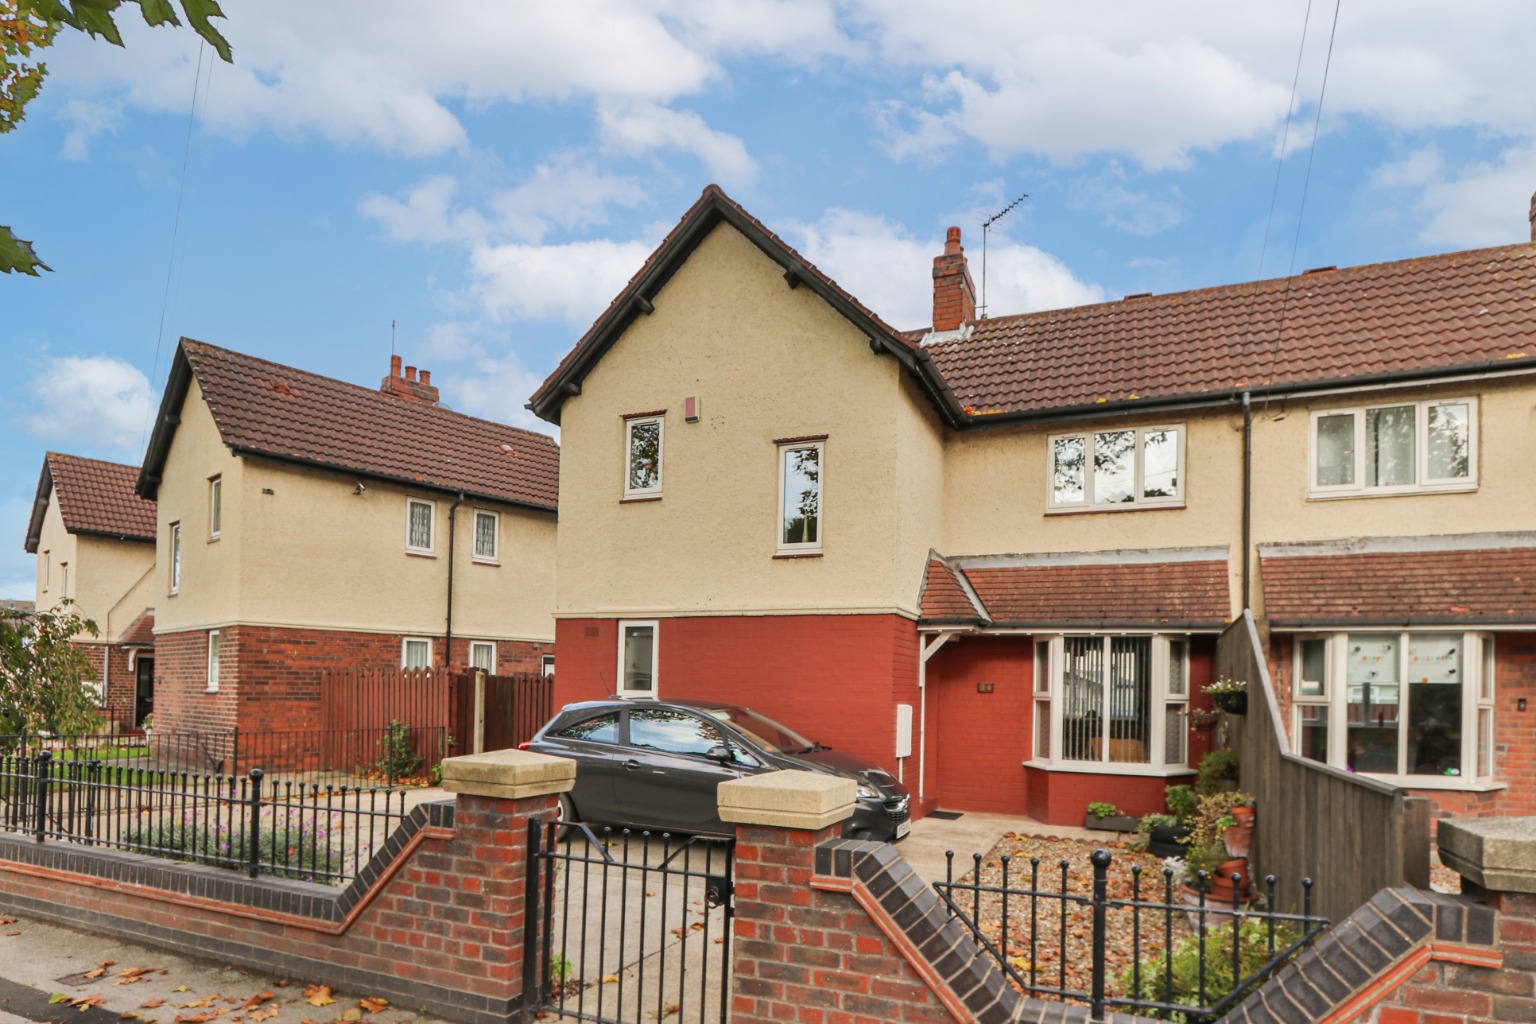 3 bed semi-detached house for sale - Property Image 1